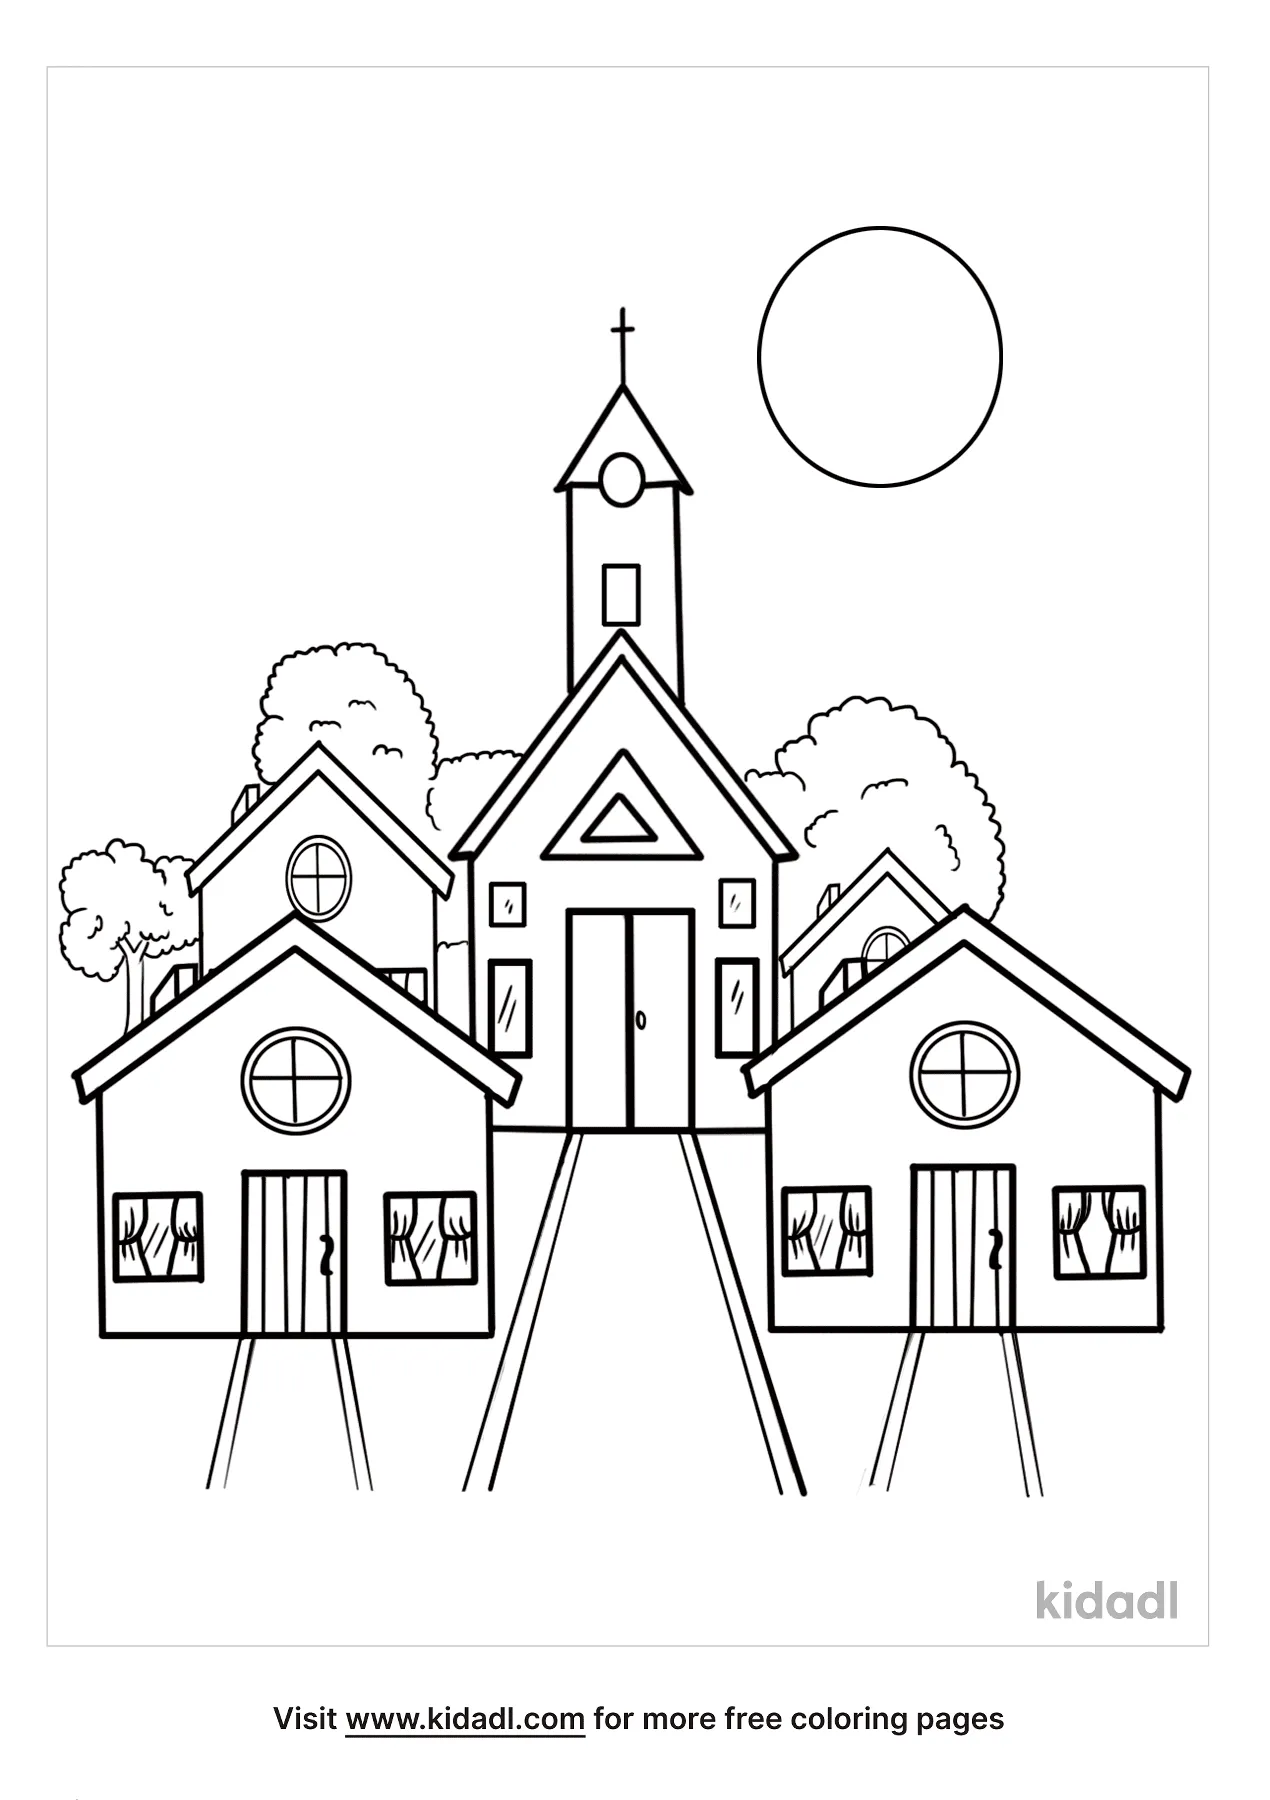 Neighborhood Coloring Pages   Free Buildings Coloring Pages   Kidadl